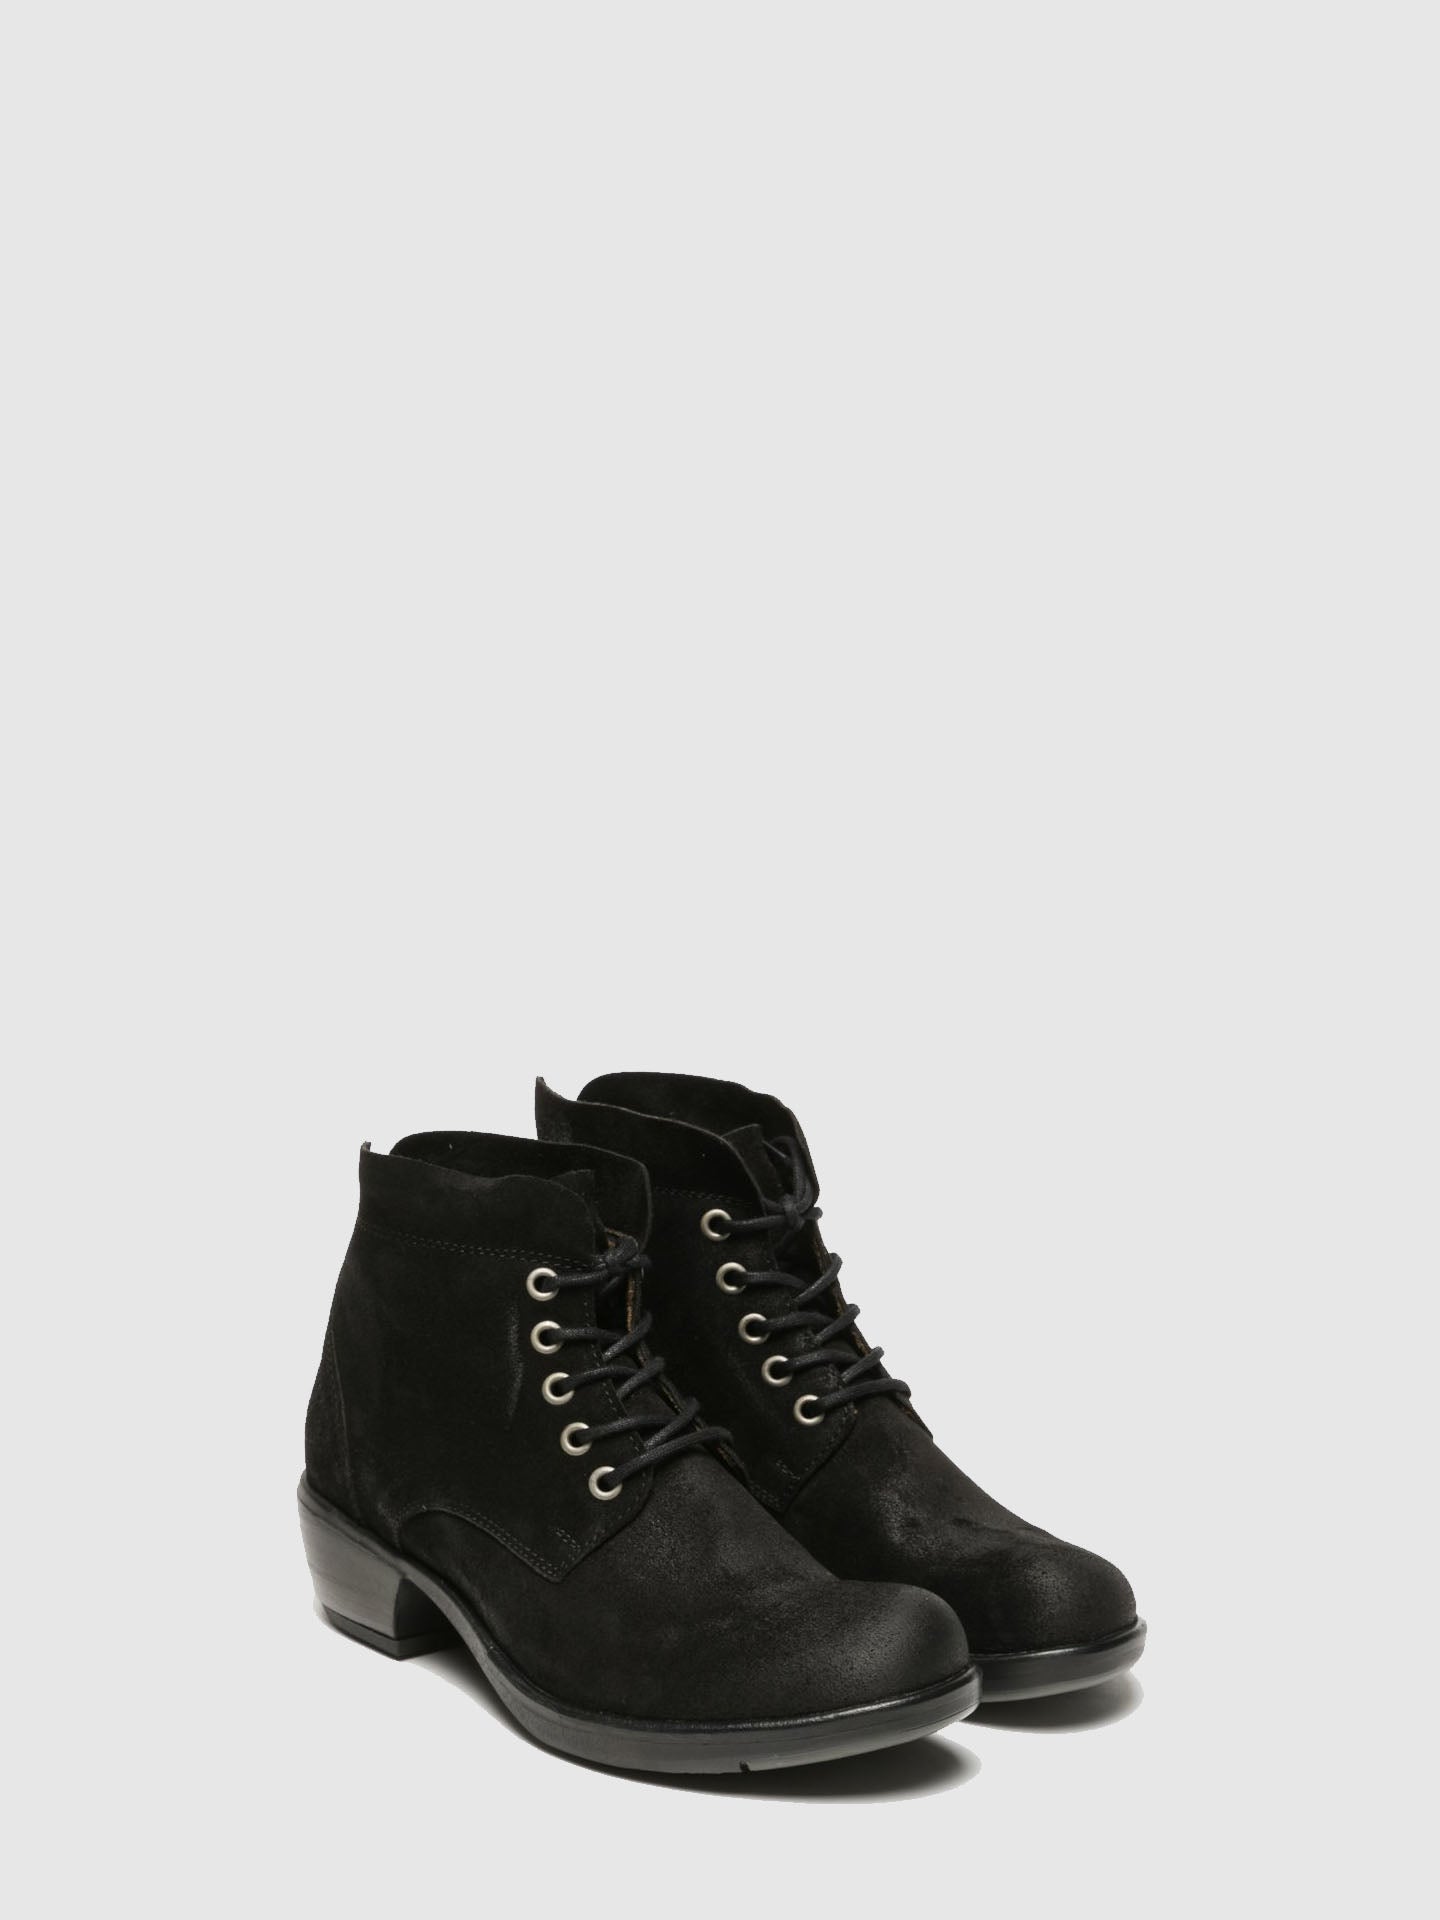 Fly London Black Lace-up Ankle Boots